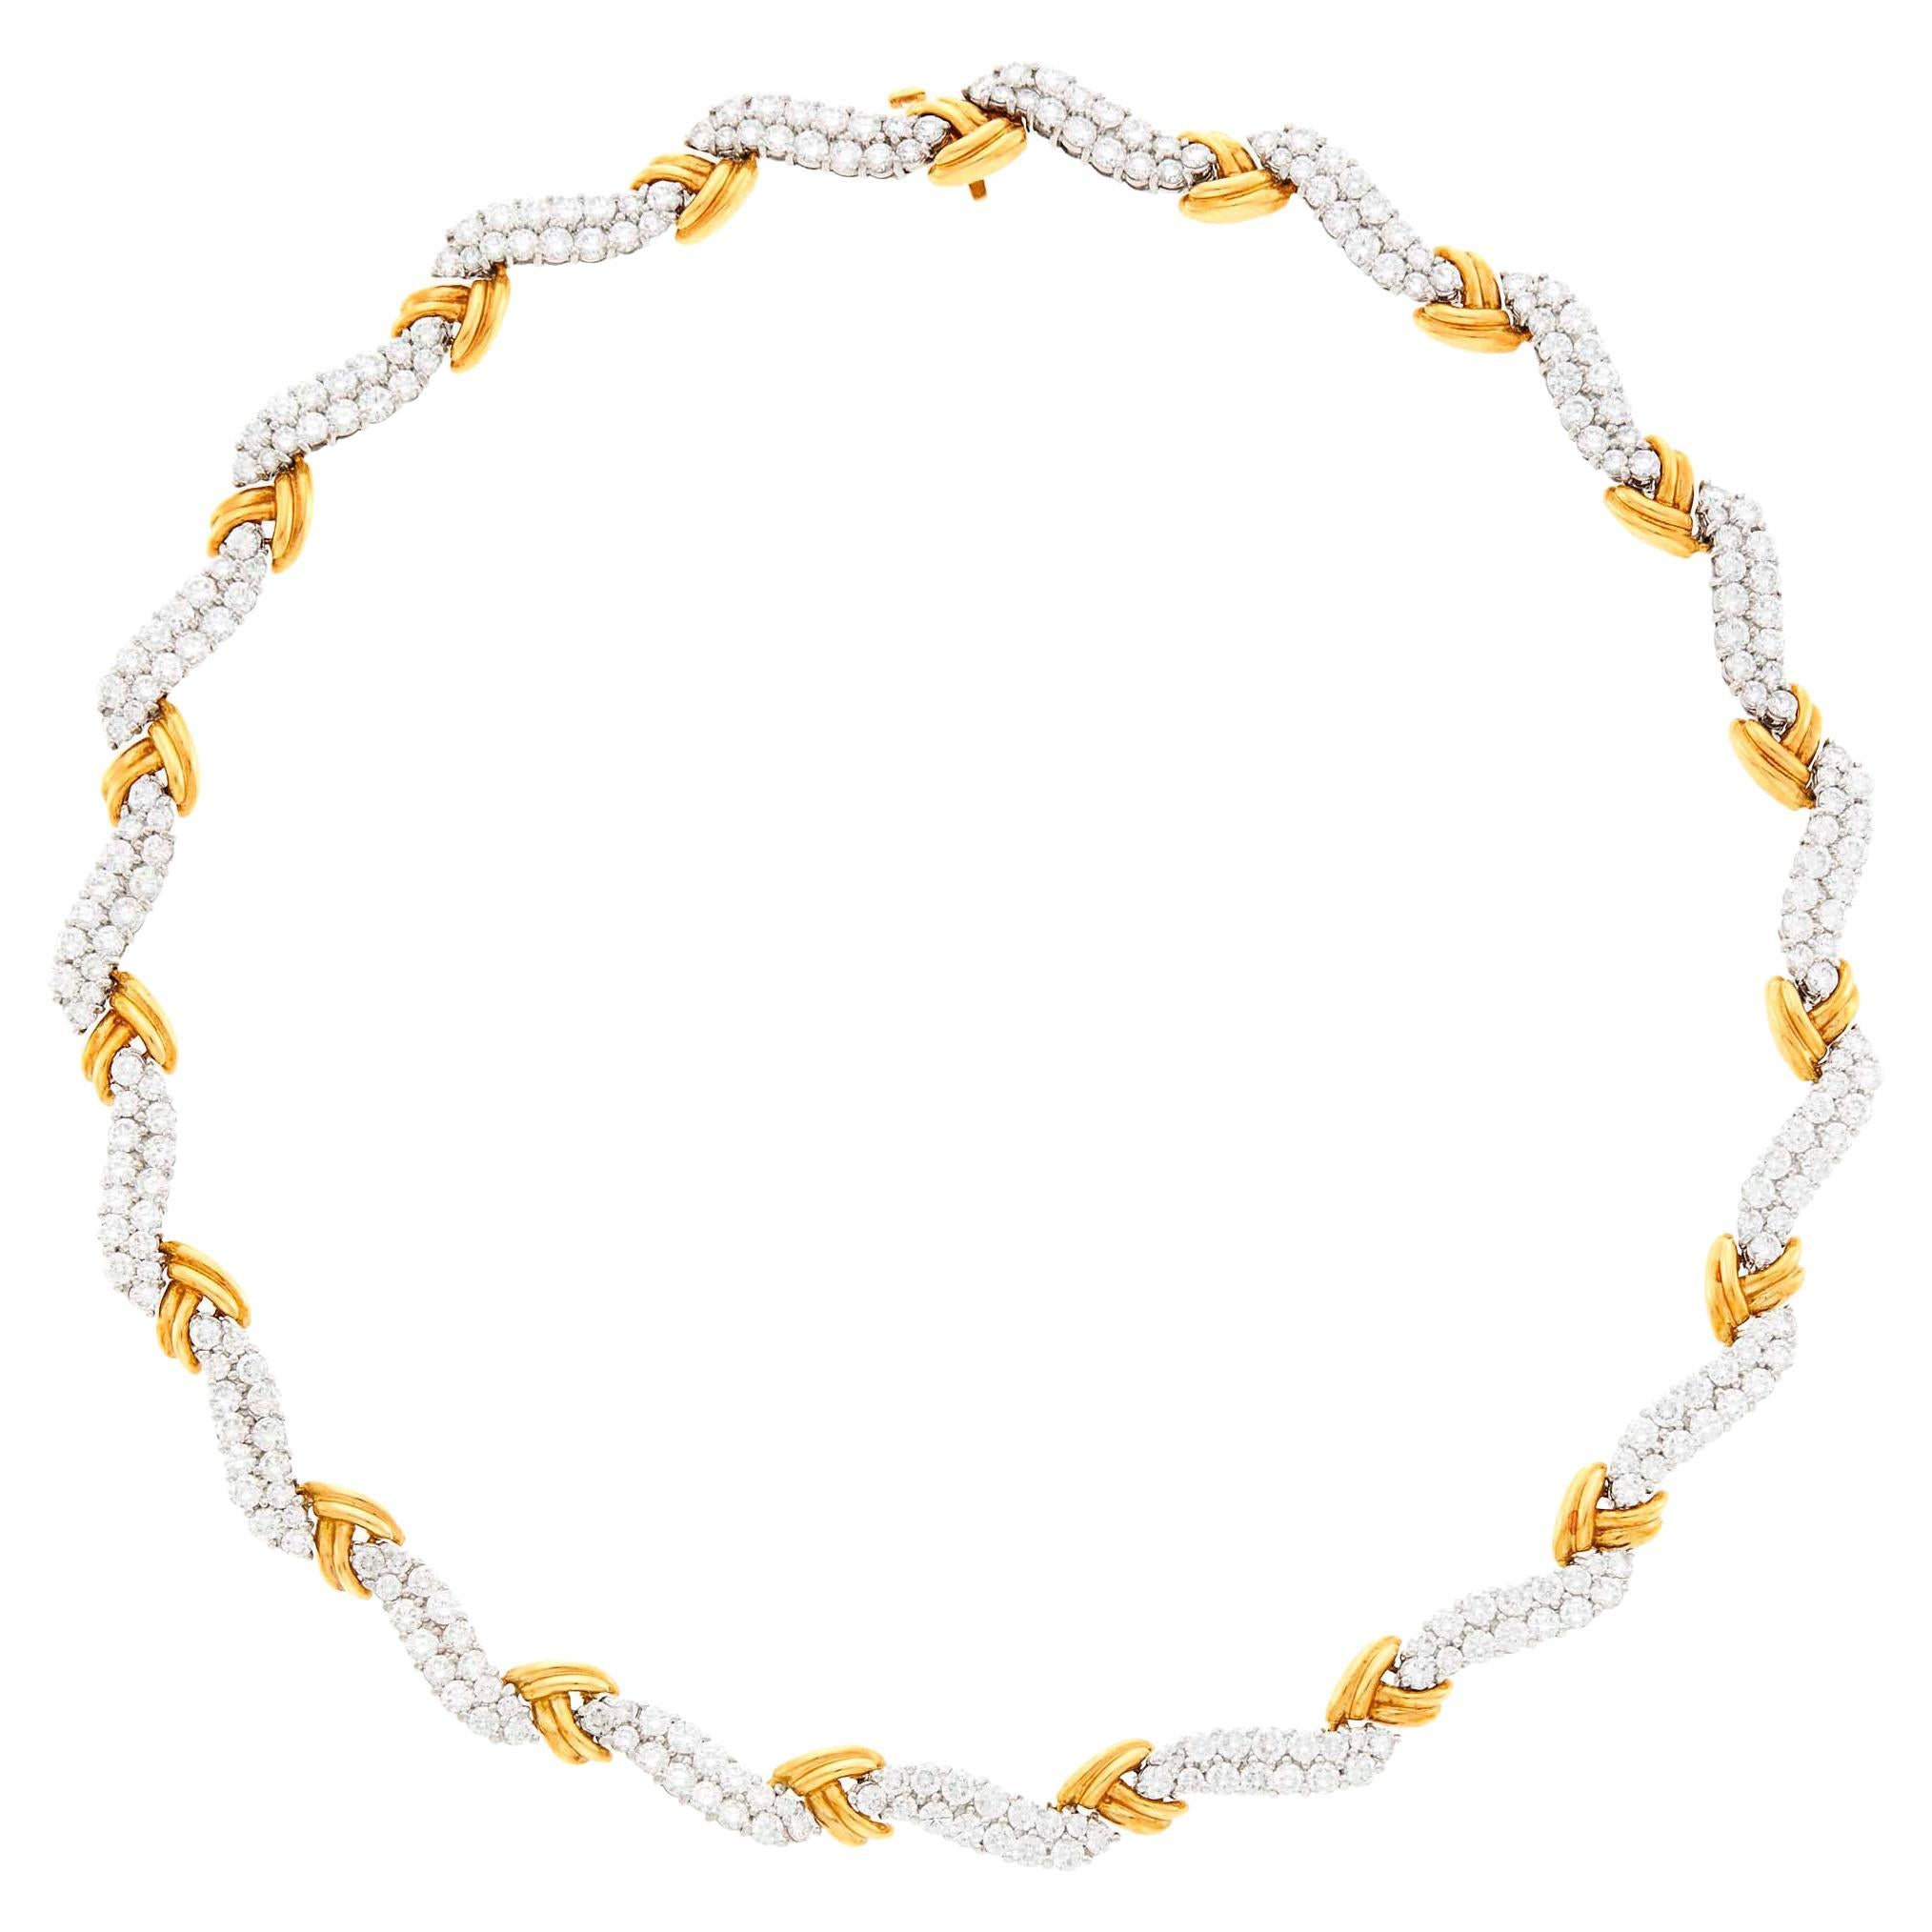 Tiffany & Co. Platinum, Gold and Diamond Necklace